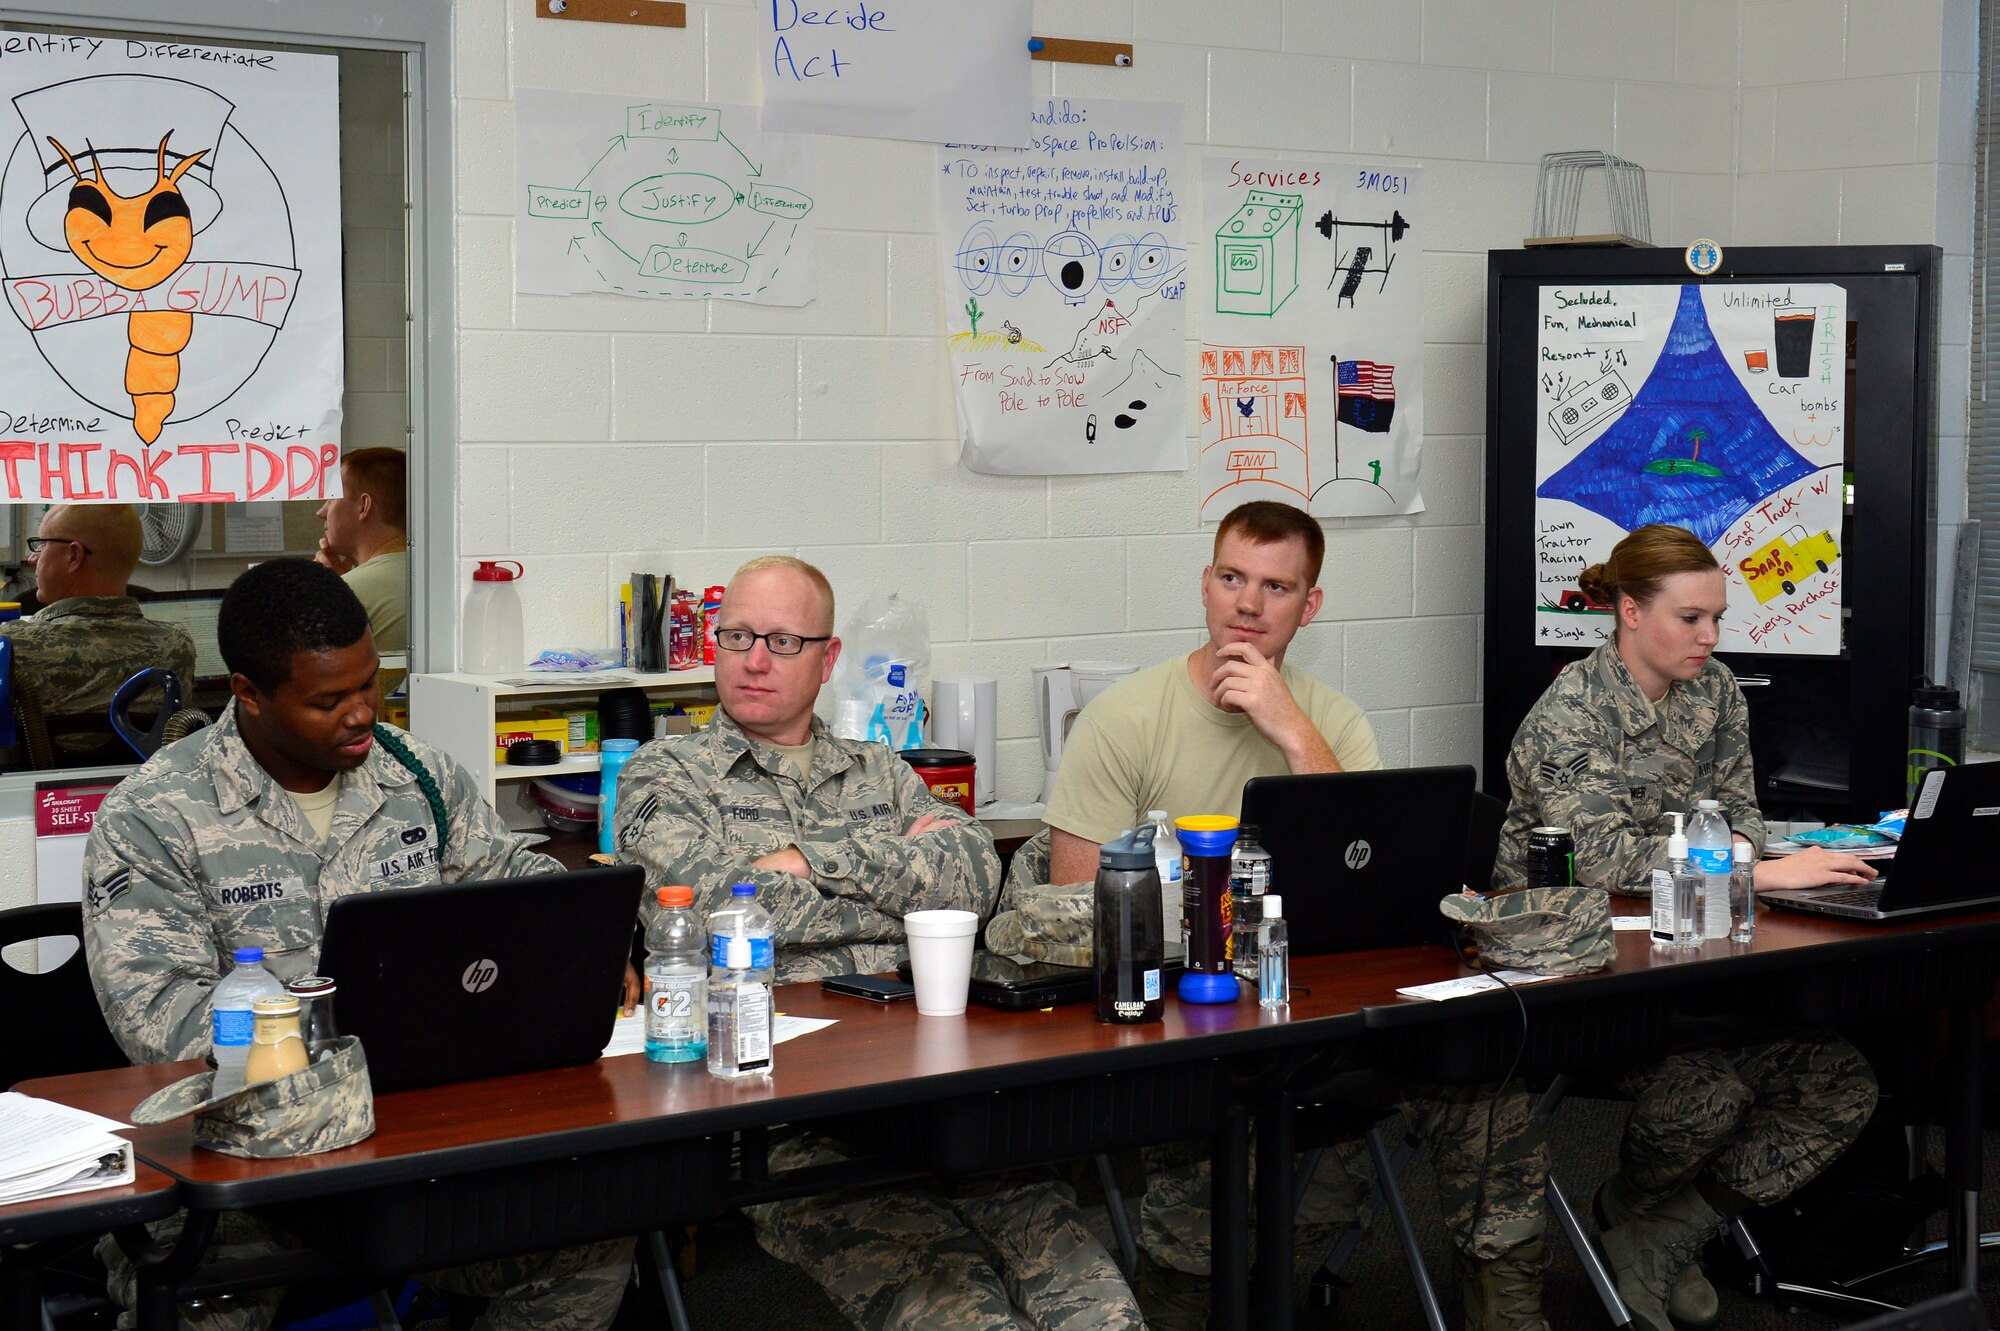 MCGHEE TYSON AIR NATIONAL GUARD BASE, Tenn. - Students attend the in-resident Airman leadership school through the Paul H. Lankford Enlisted Professional Military Education Center here Sept. 24, 2015, at the I.G. Brown Training and Education Center. Group discussions now supplement the Airman leadership distance learning course through a 2016 guide developed by the Lankford EPME Center and the Air Force's Barnes Center for Enlisted Education. (U.S. Air National Guard photo by Master Sgt. Jerry D. Harlan/Released)